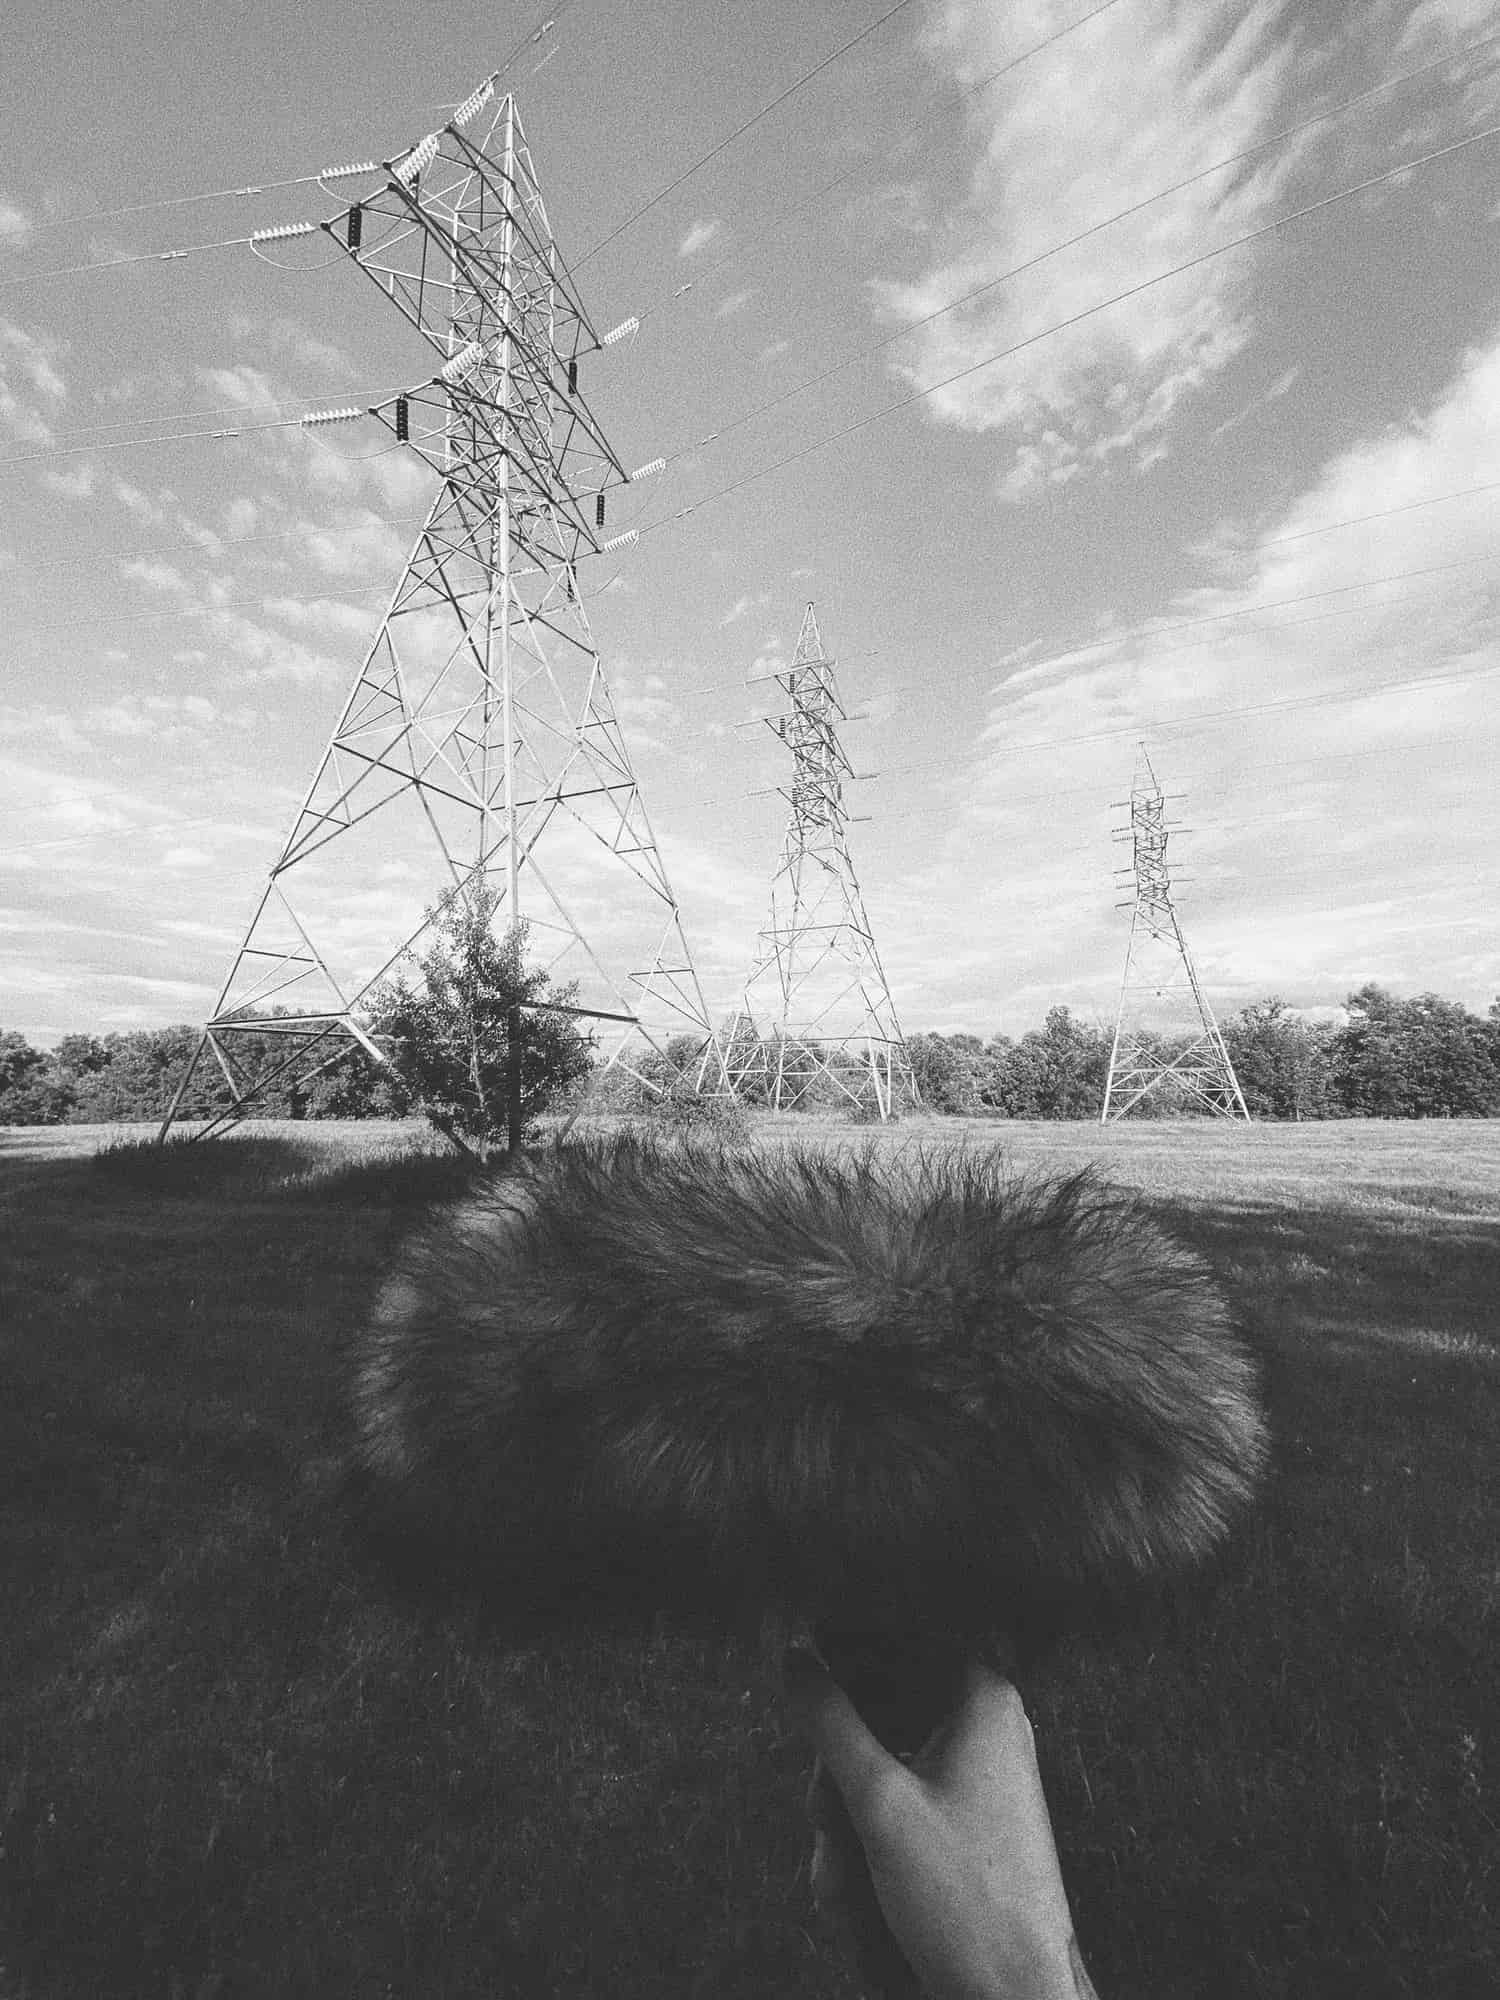 Black and white photograph of a hand holding a microphone inside a wind guard with an array of transformer towers in the background.